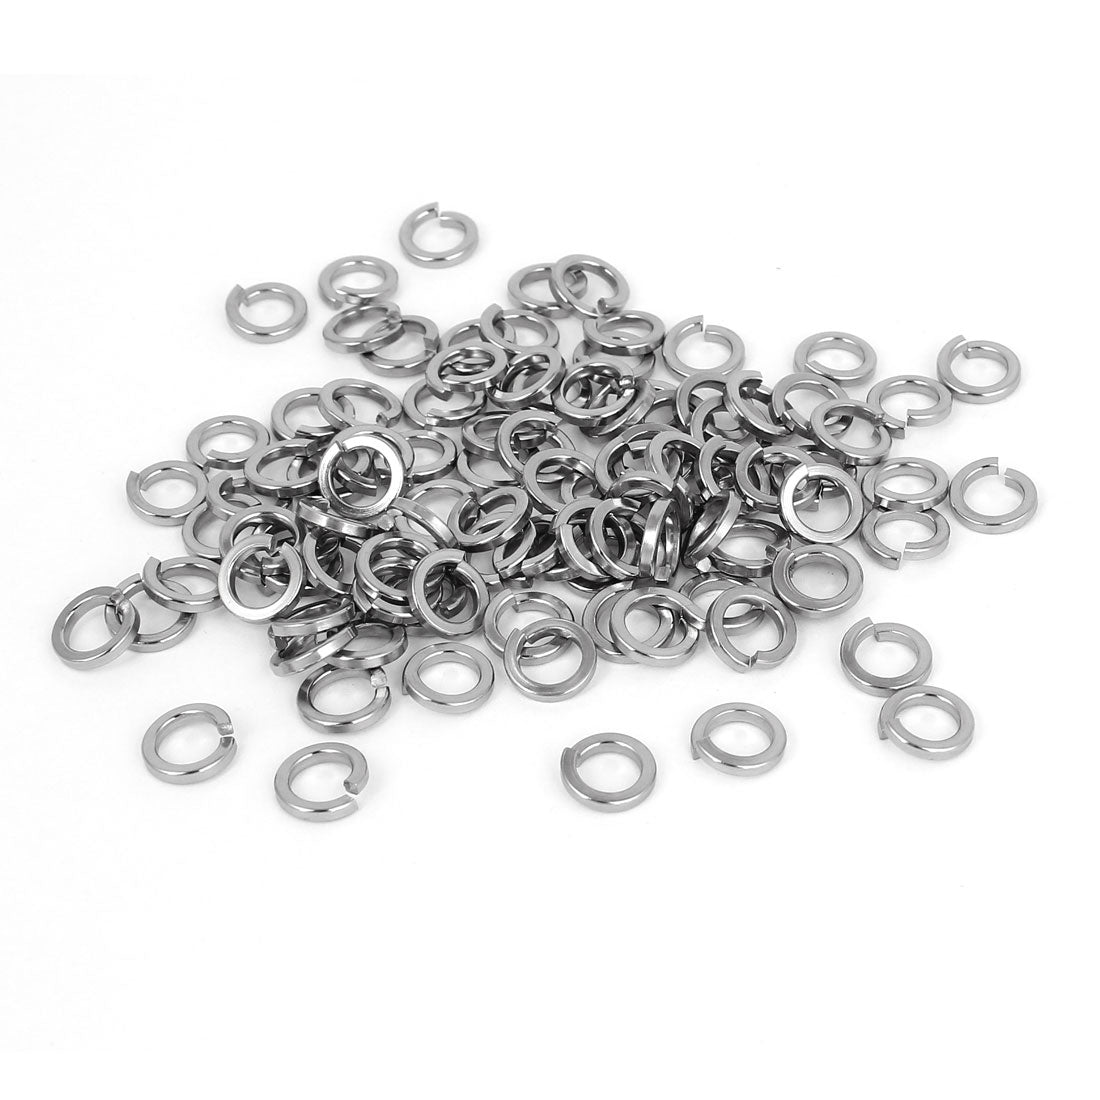 uxcell Uxcell 100pcs 316 Stainless Steel Split Lock Spring Washers 1/4" Screw Spacer Pad